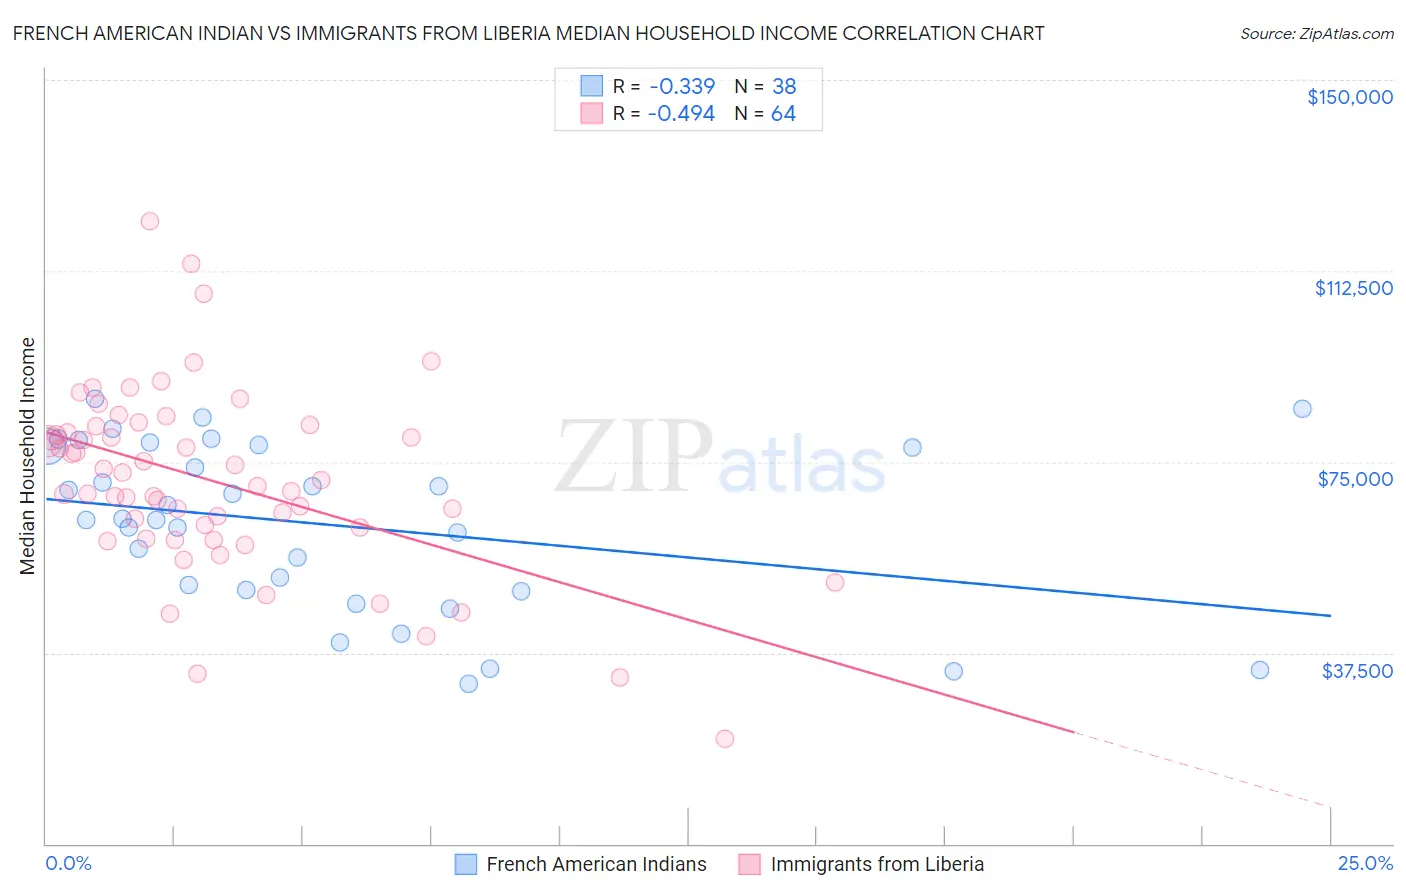 French American Indian vs Immigrants from Liberia Median Household Income